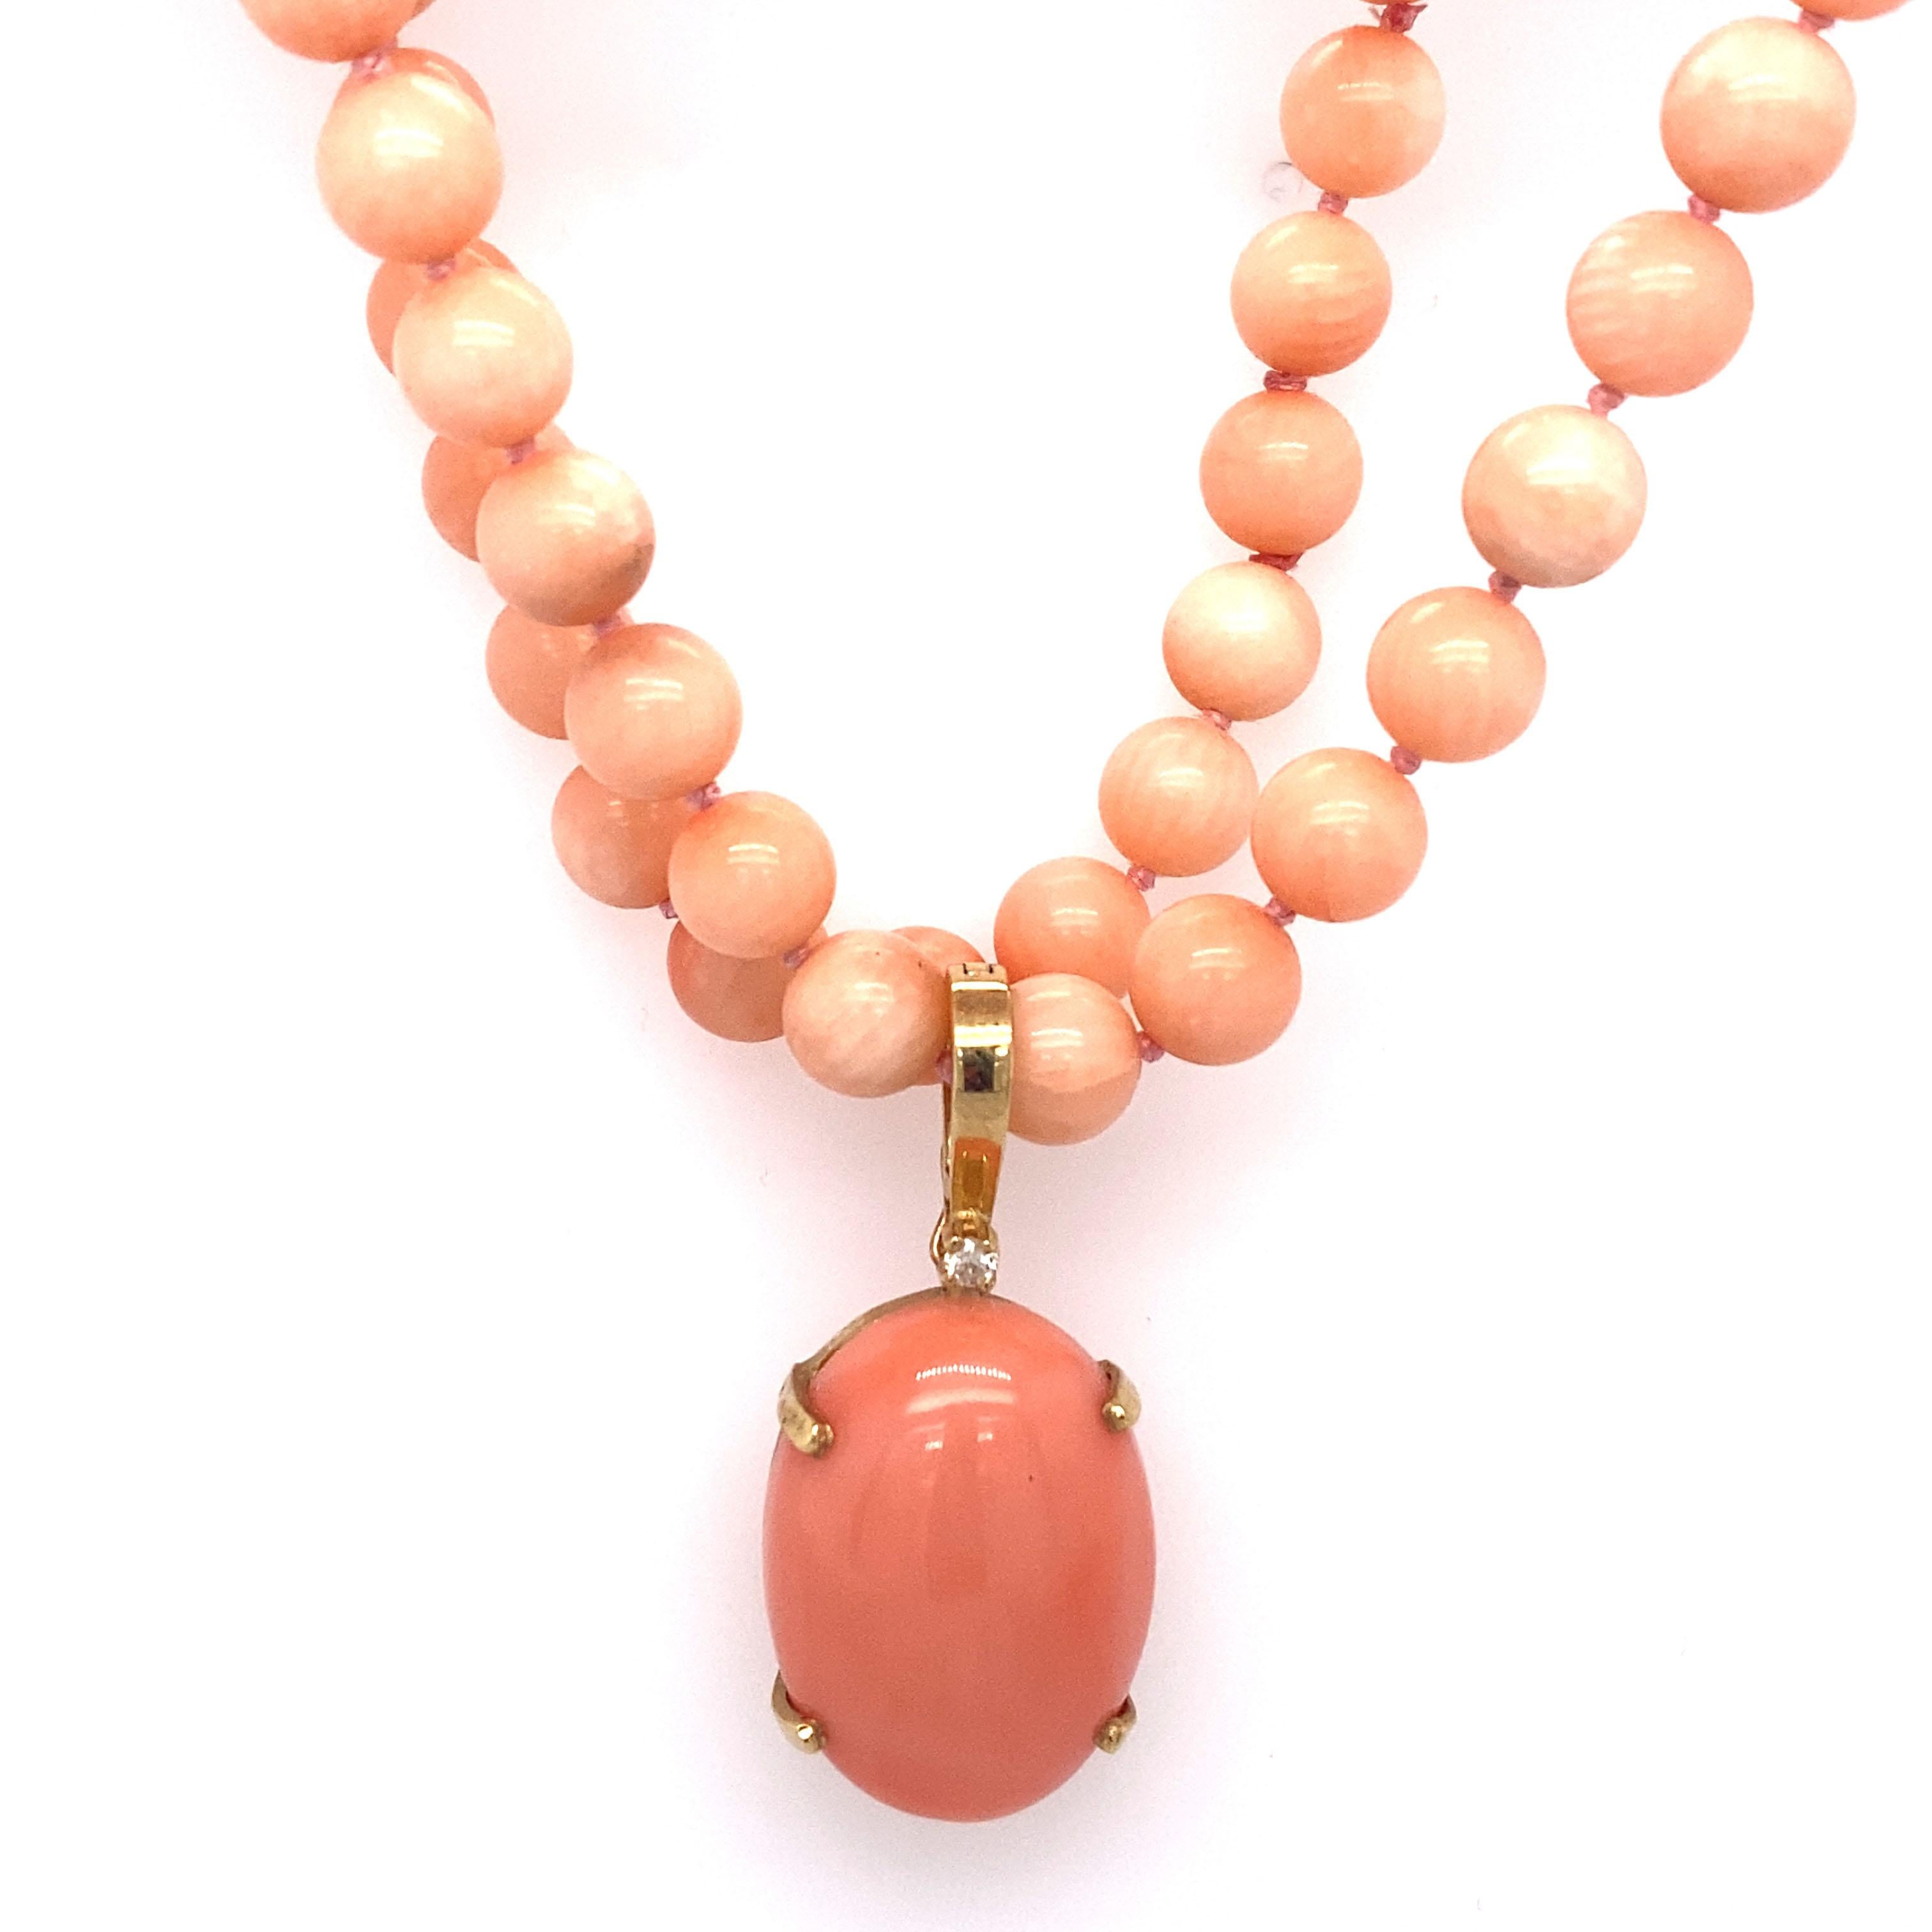 This high quality pink coral necklace has a striking pink oval enhancer in 18 Karat Gold with a small diamond accent. Clasp is 14 Karat Yellow Gold. The pendant is 4 prong set. 

Circa: 1980s
Metal Type: 18 karat yellow gold
Weight: 26.7